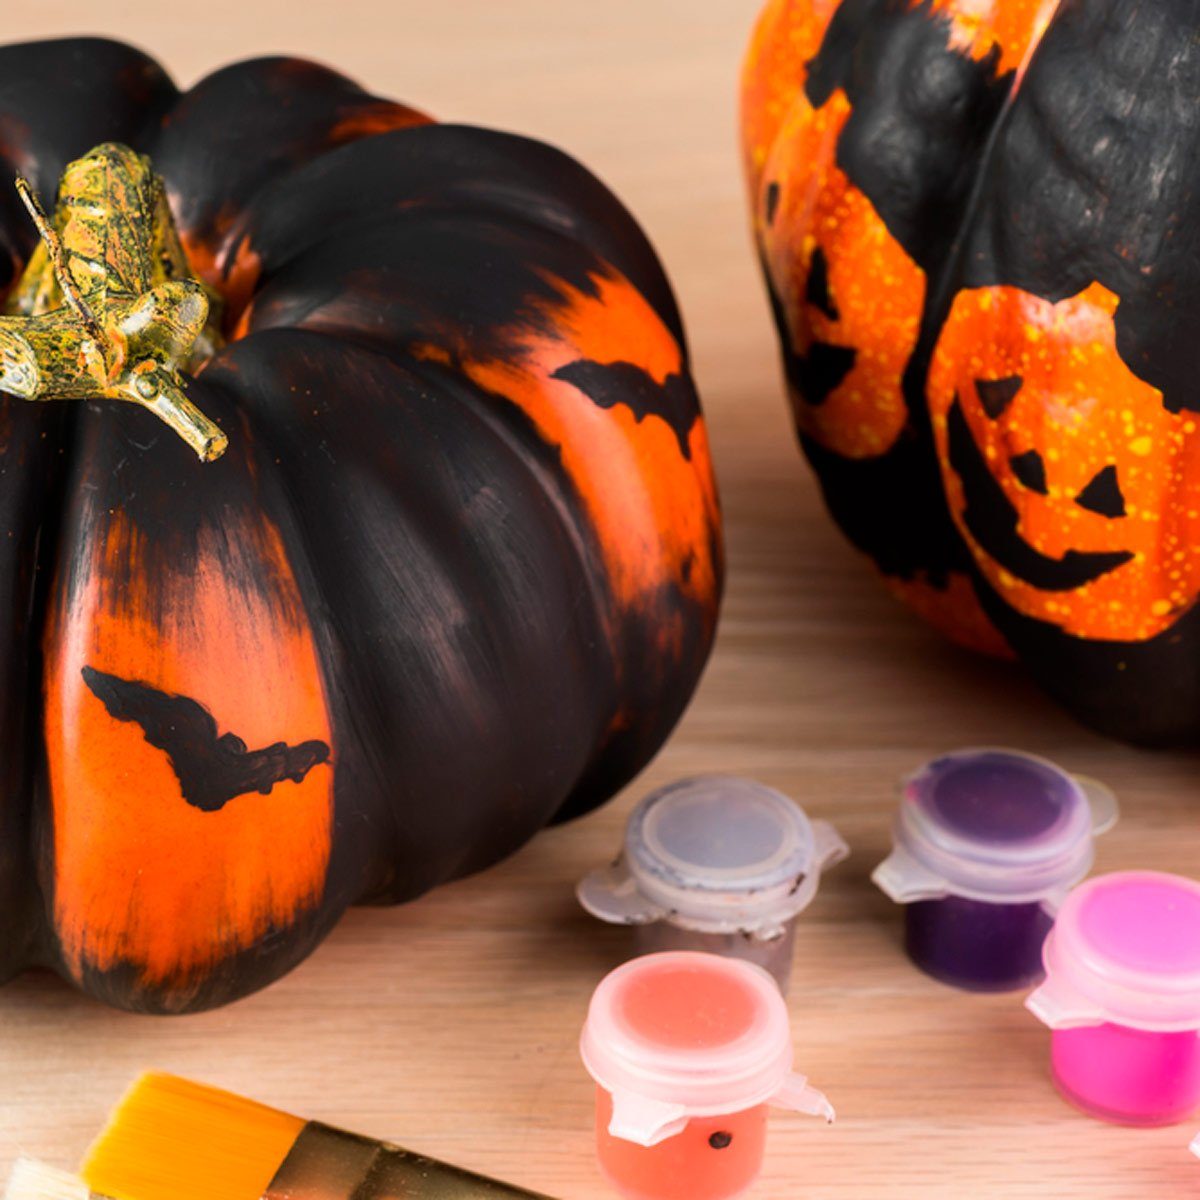 New Ideas For Painting Pumpkins with Simple Decor